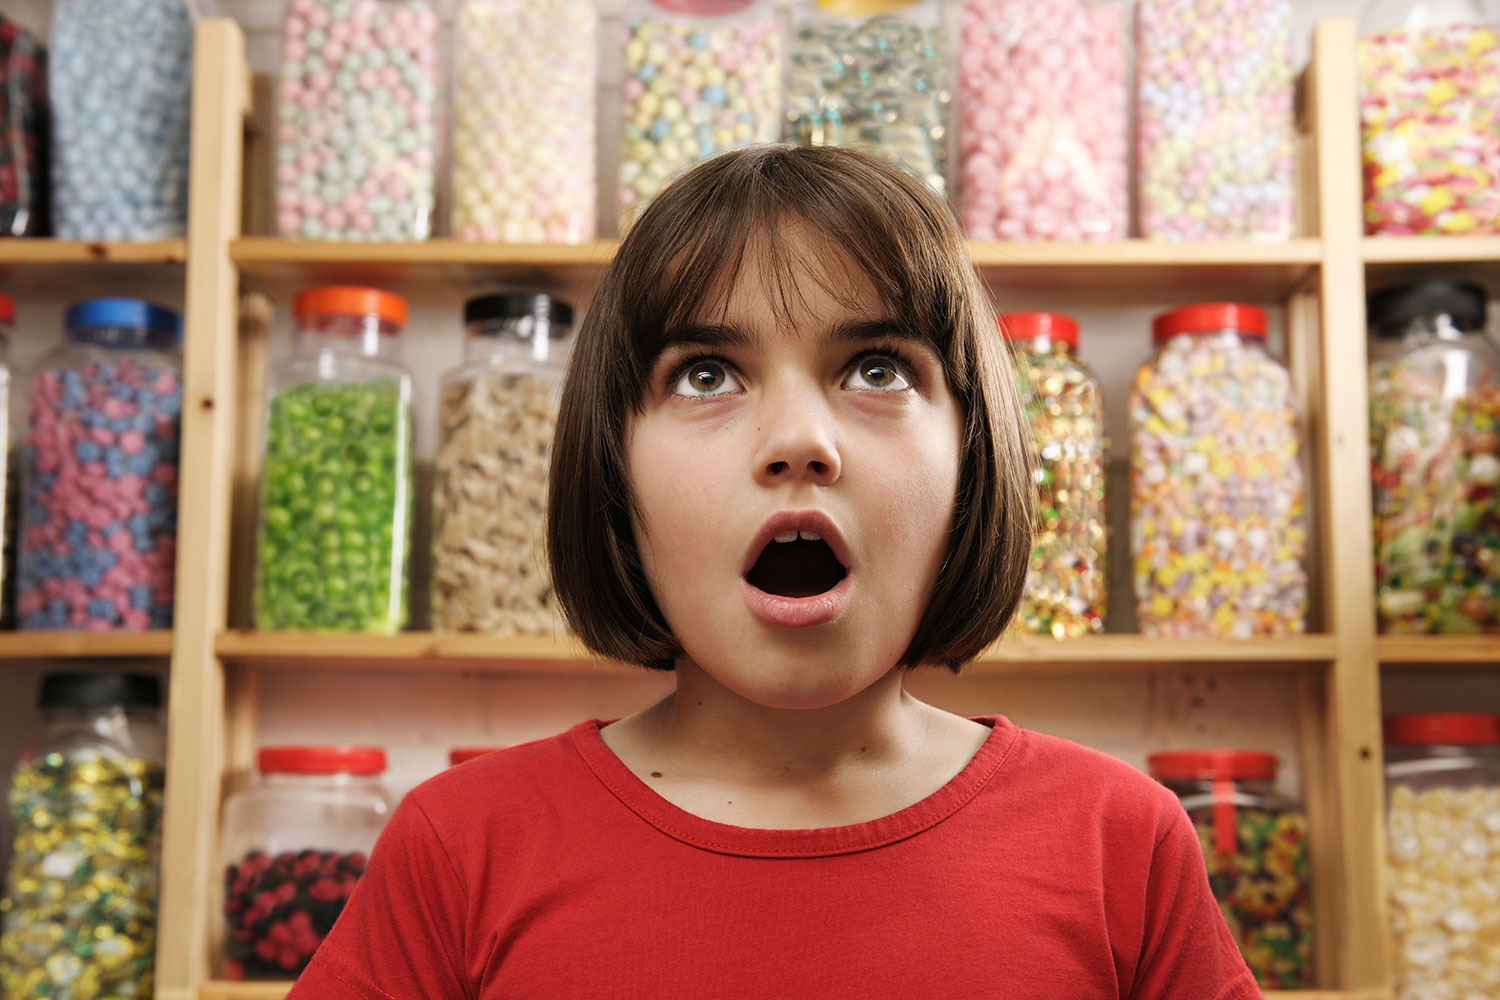 child in sweet shop